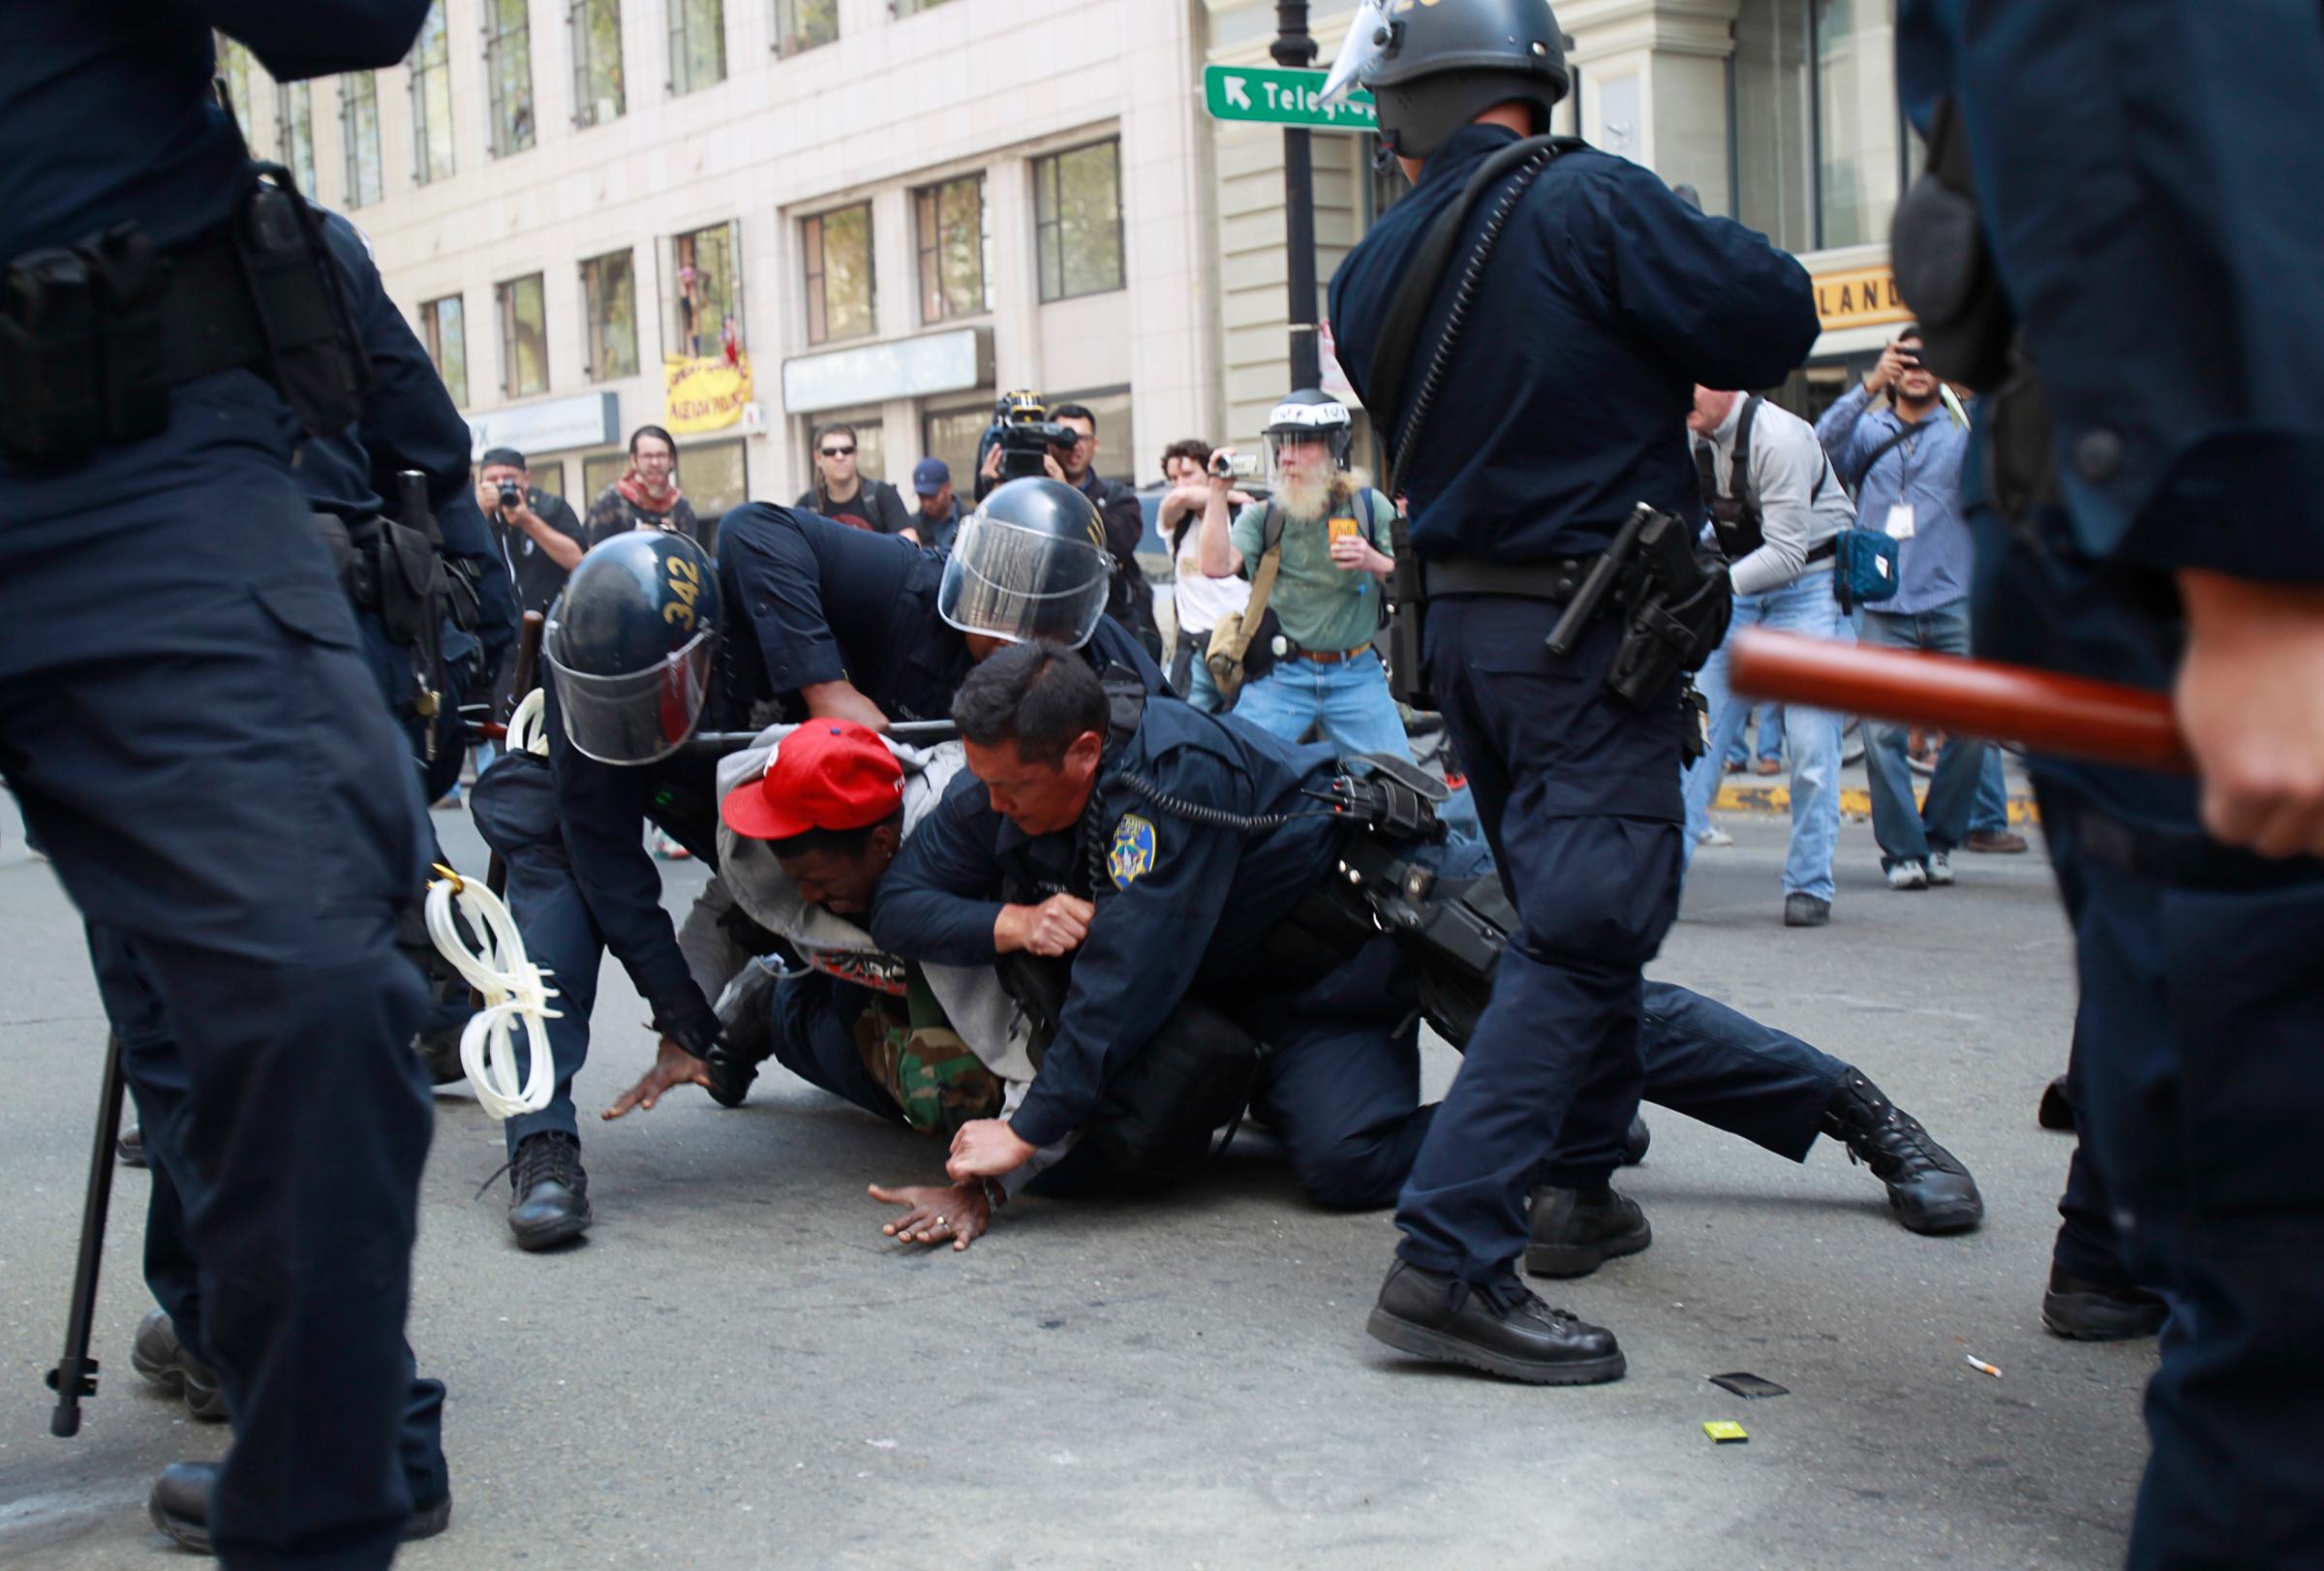 Occupy demonstrators clash with Oakland police during May Day protest in Oakland, California on May 1, 2012.